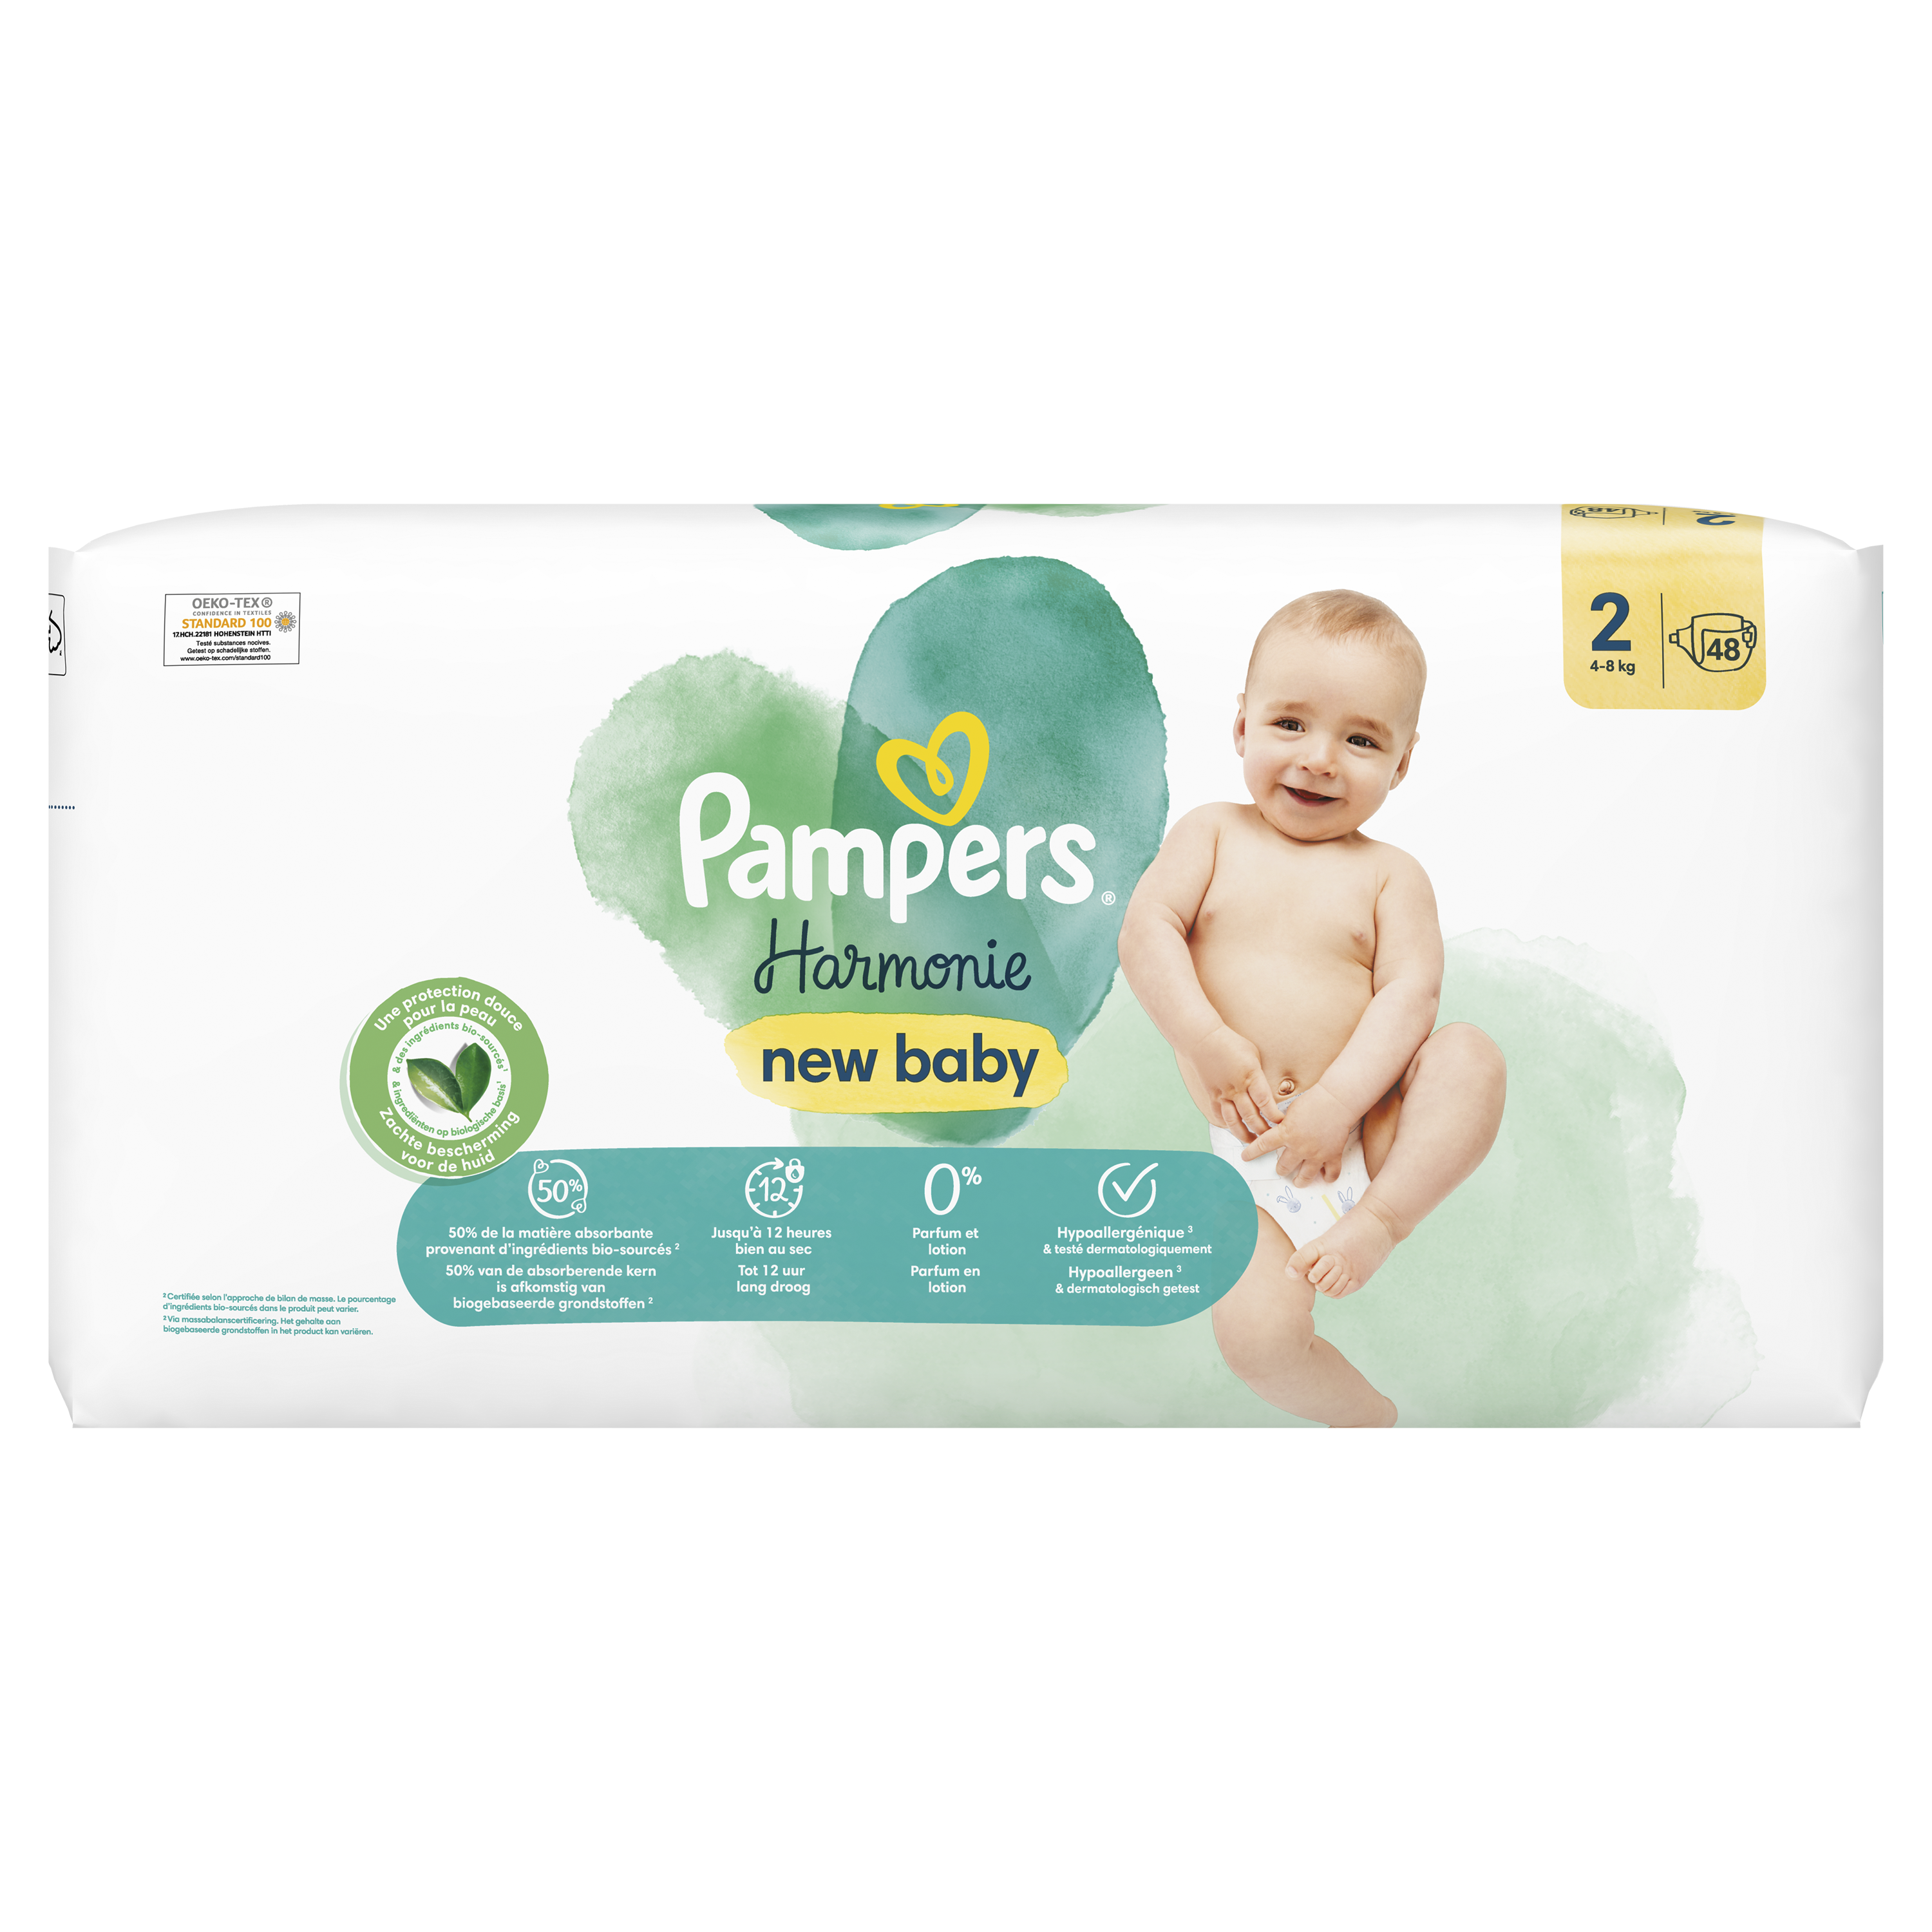 Pampers Harmonie Couches Taille 2, 48 Couches, 4Kg - 8Kg au